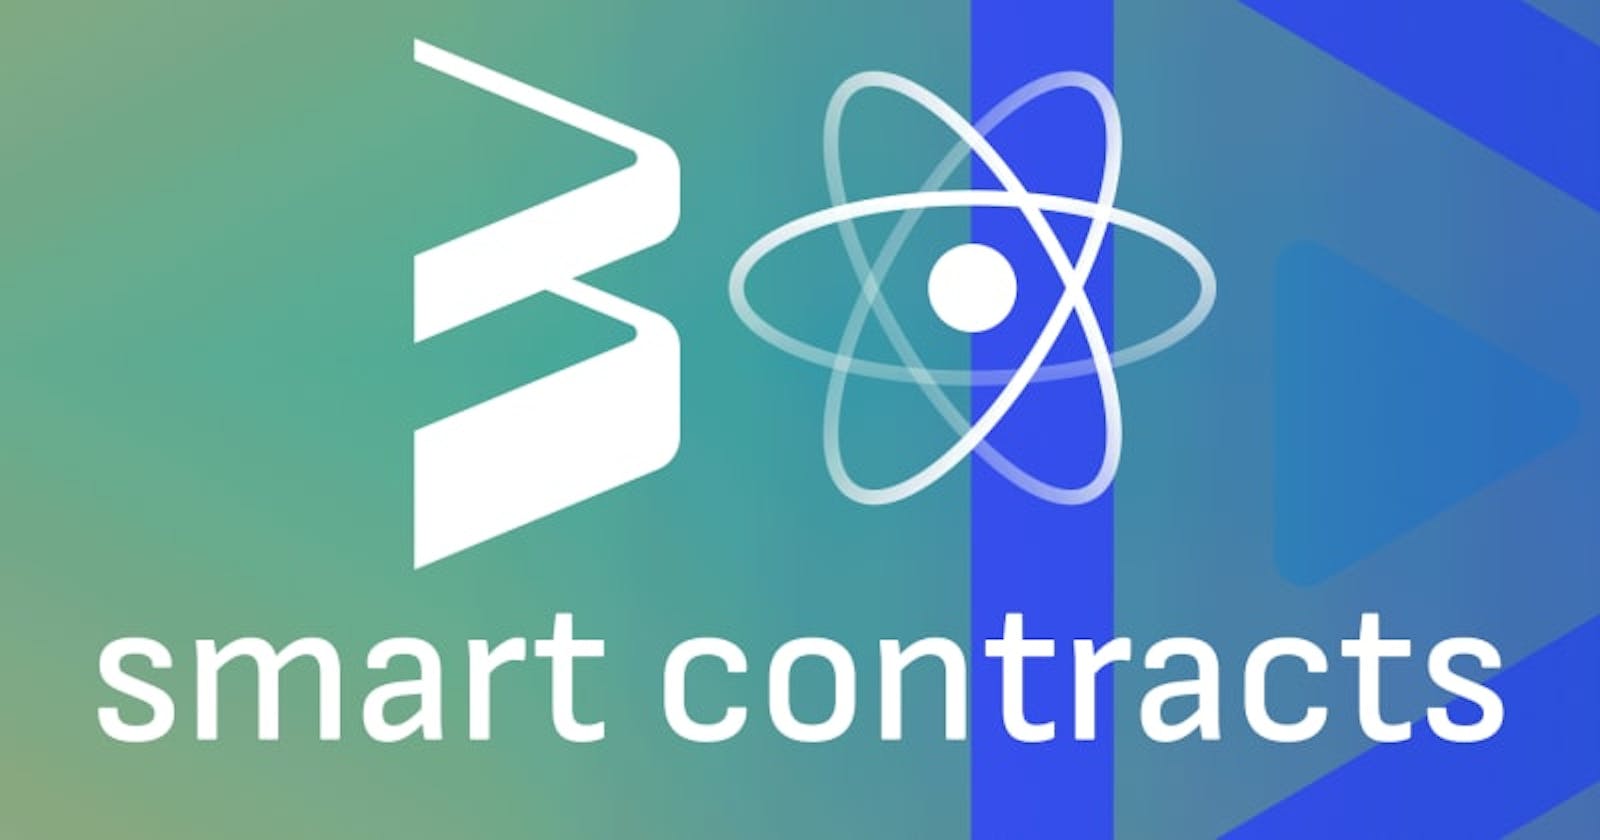 Interacting with Smart Contracts using Web3